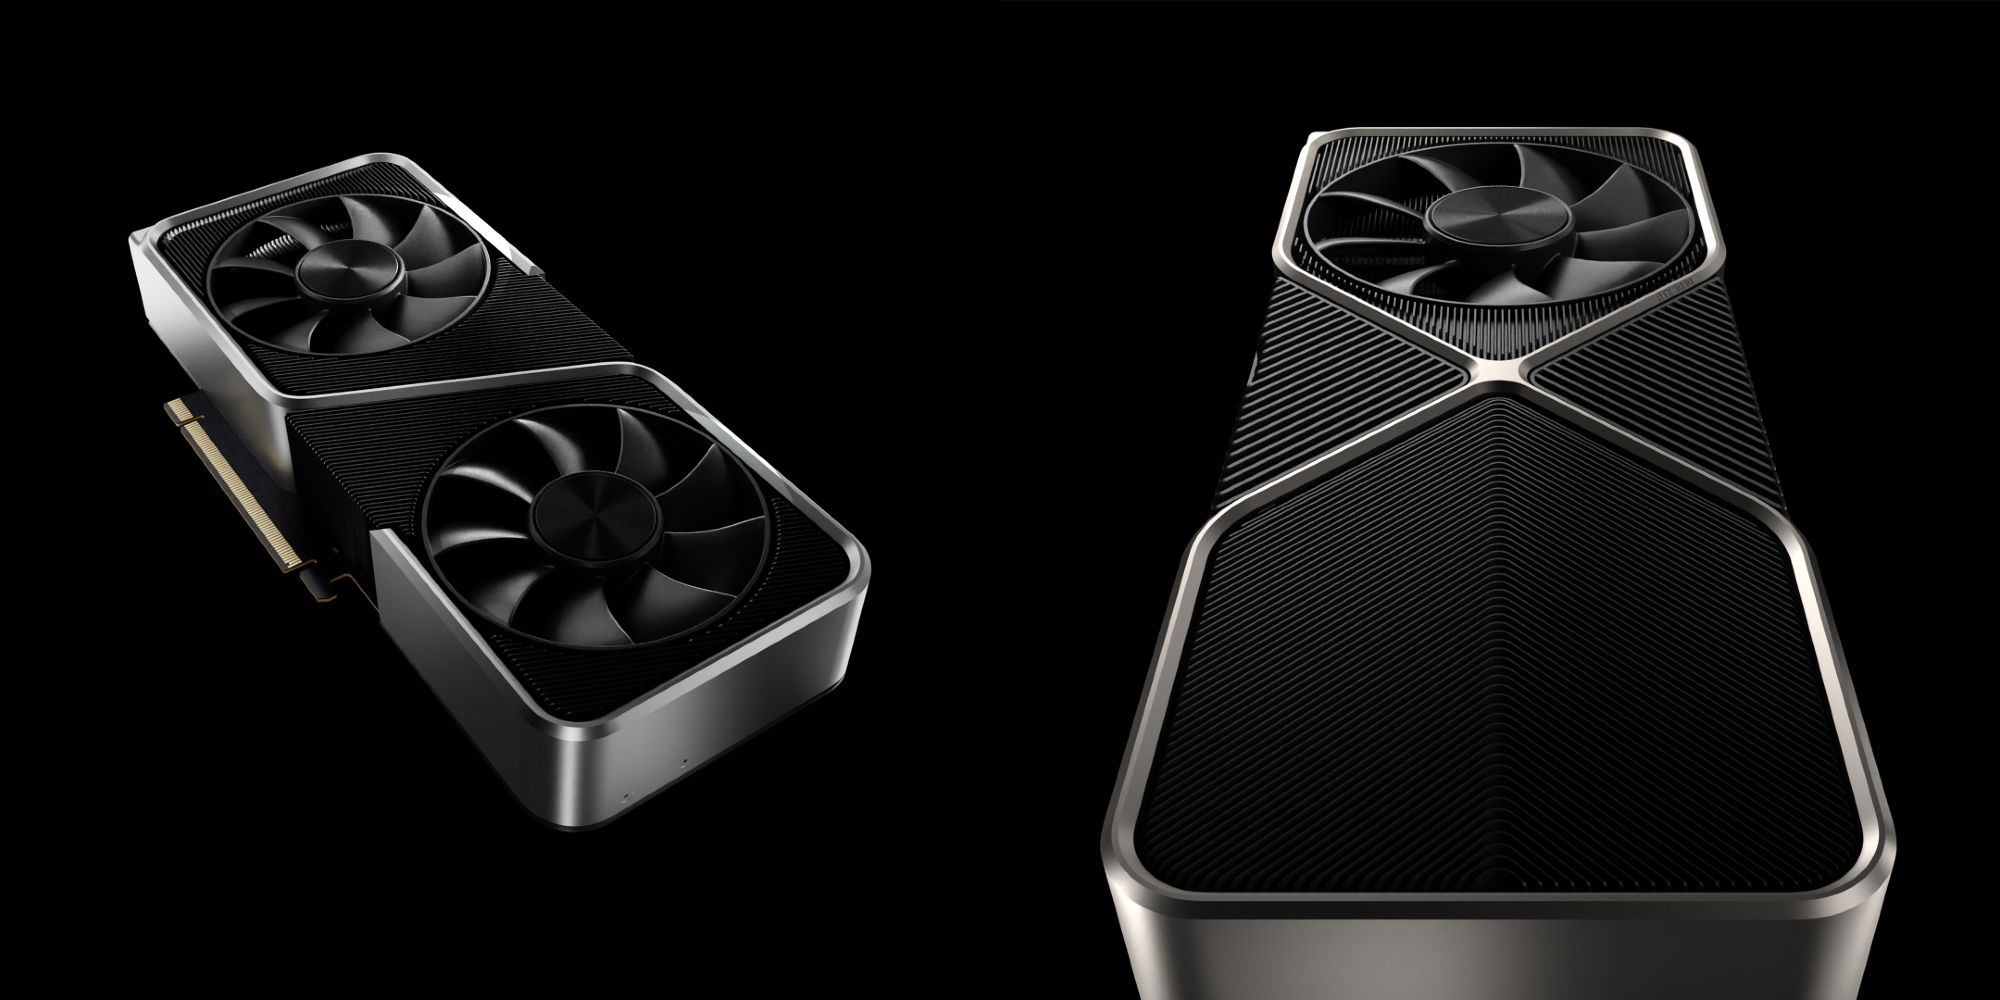 Nvidia RTX 3060 and RTX 3090 graphics cards